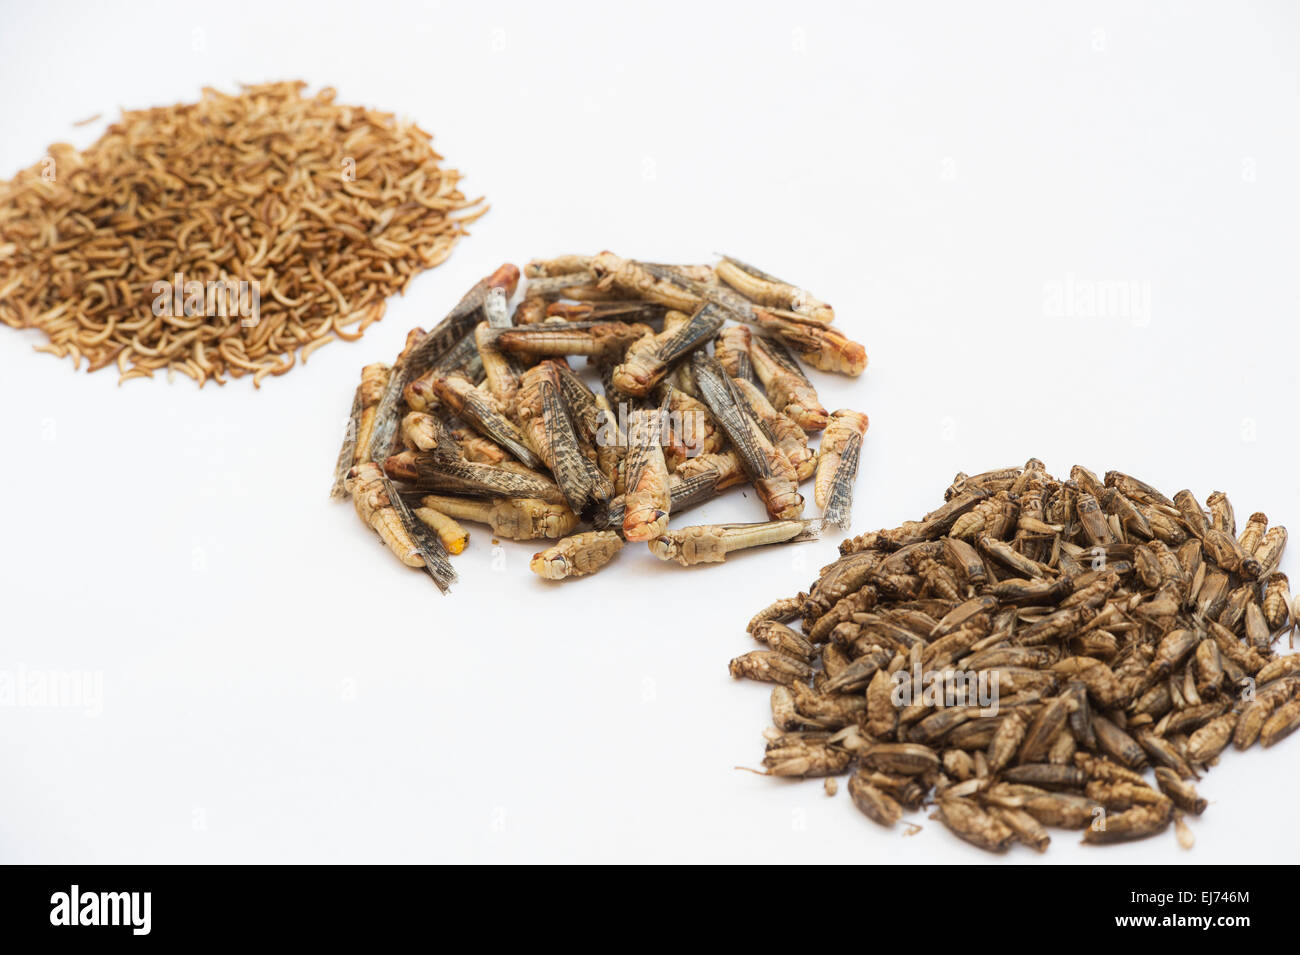 Edible insects. Grasshoppers, Buffalo Worms and Crickets on white background.  Food of the future Stock Photo